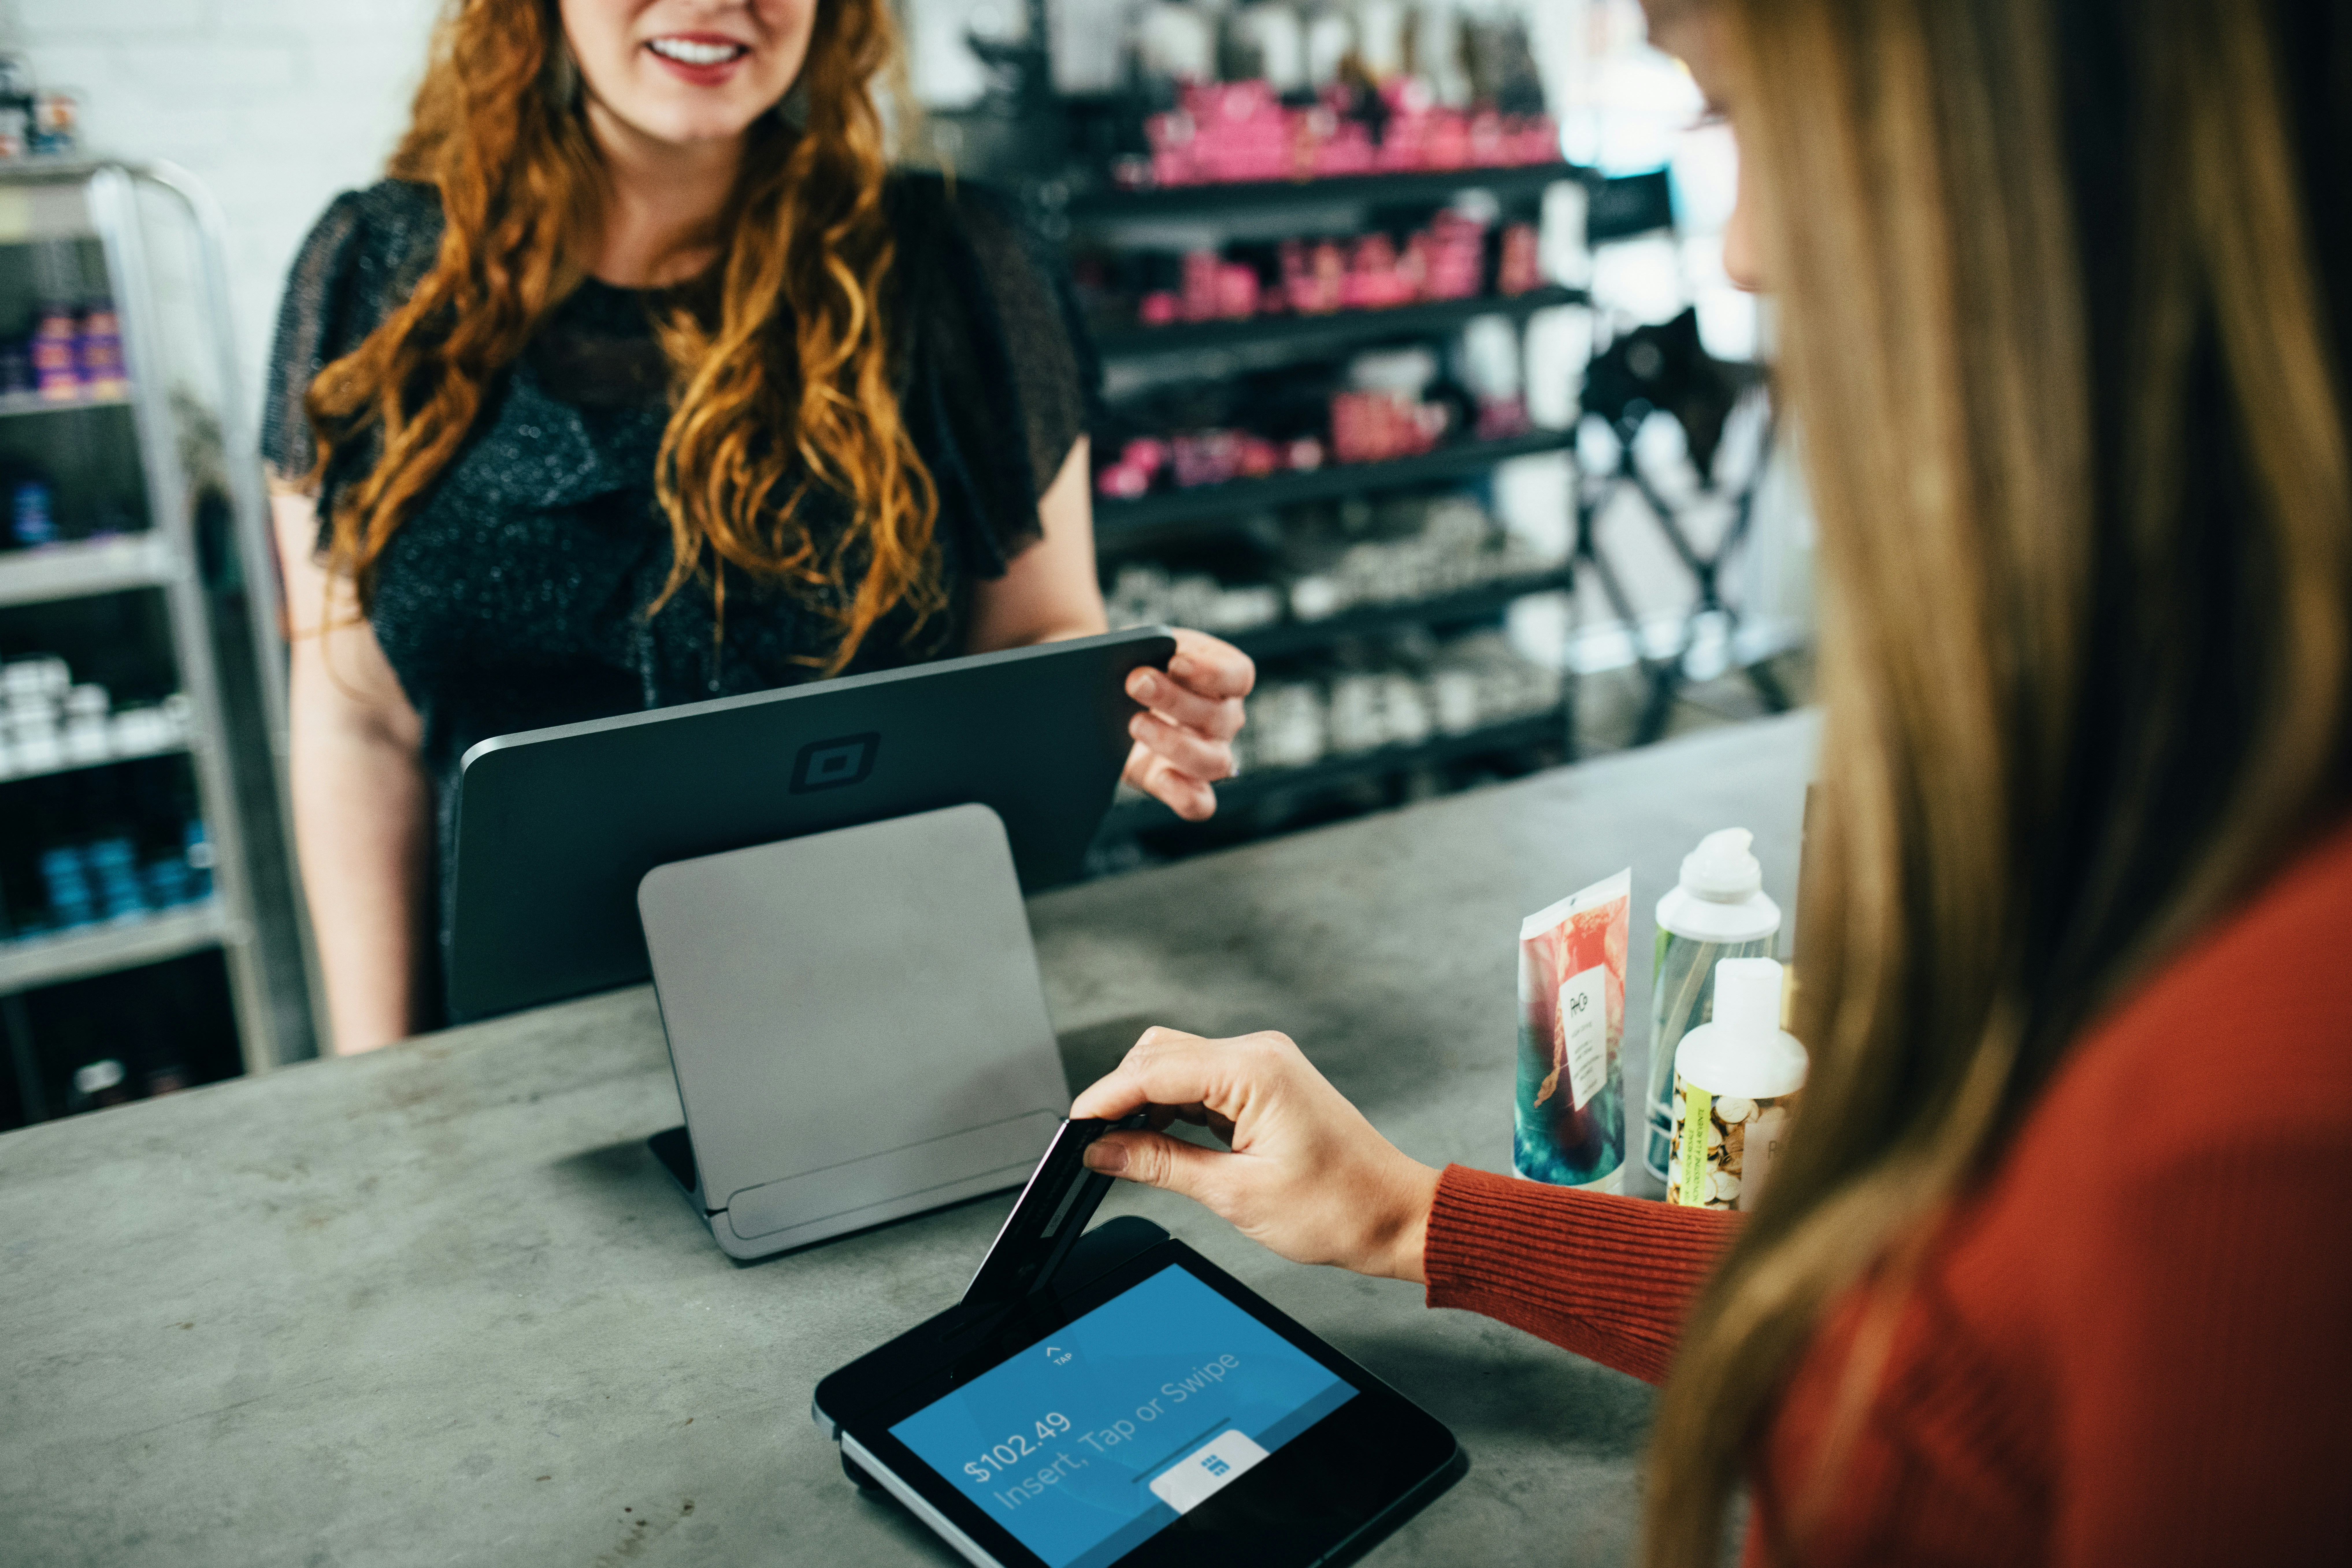 Improving Customer Experience Through Technology